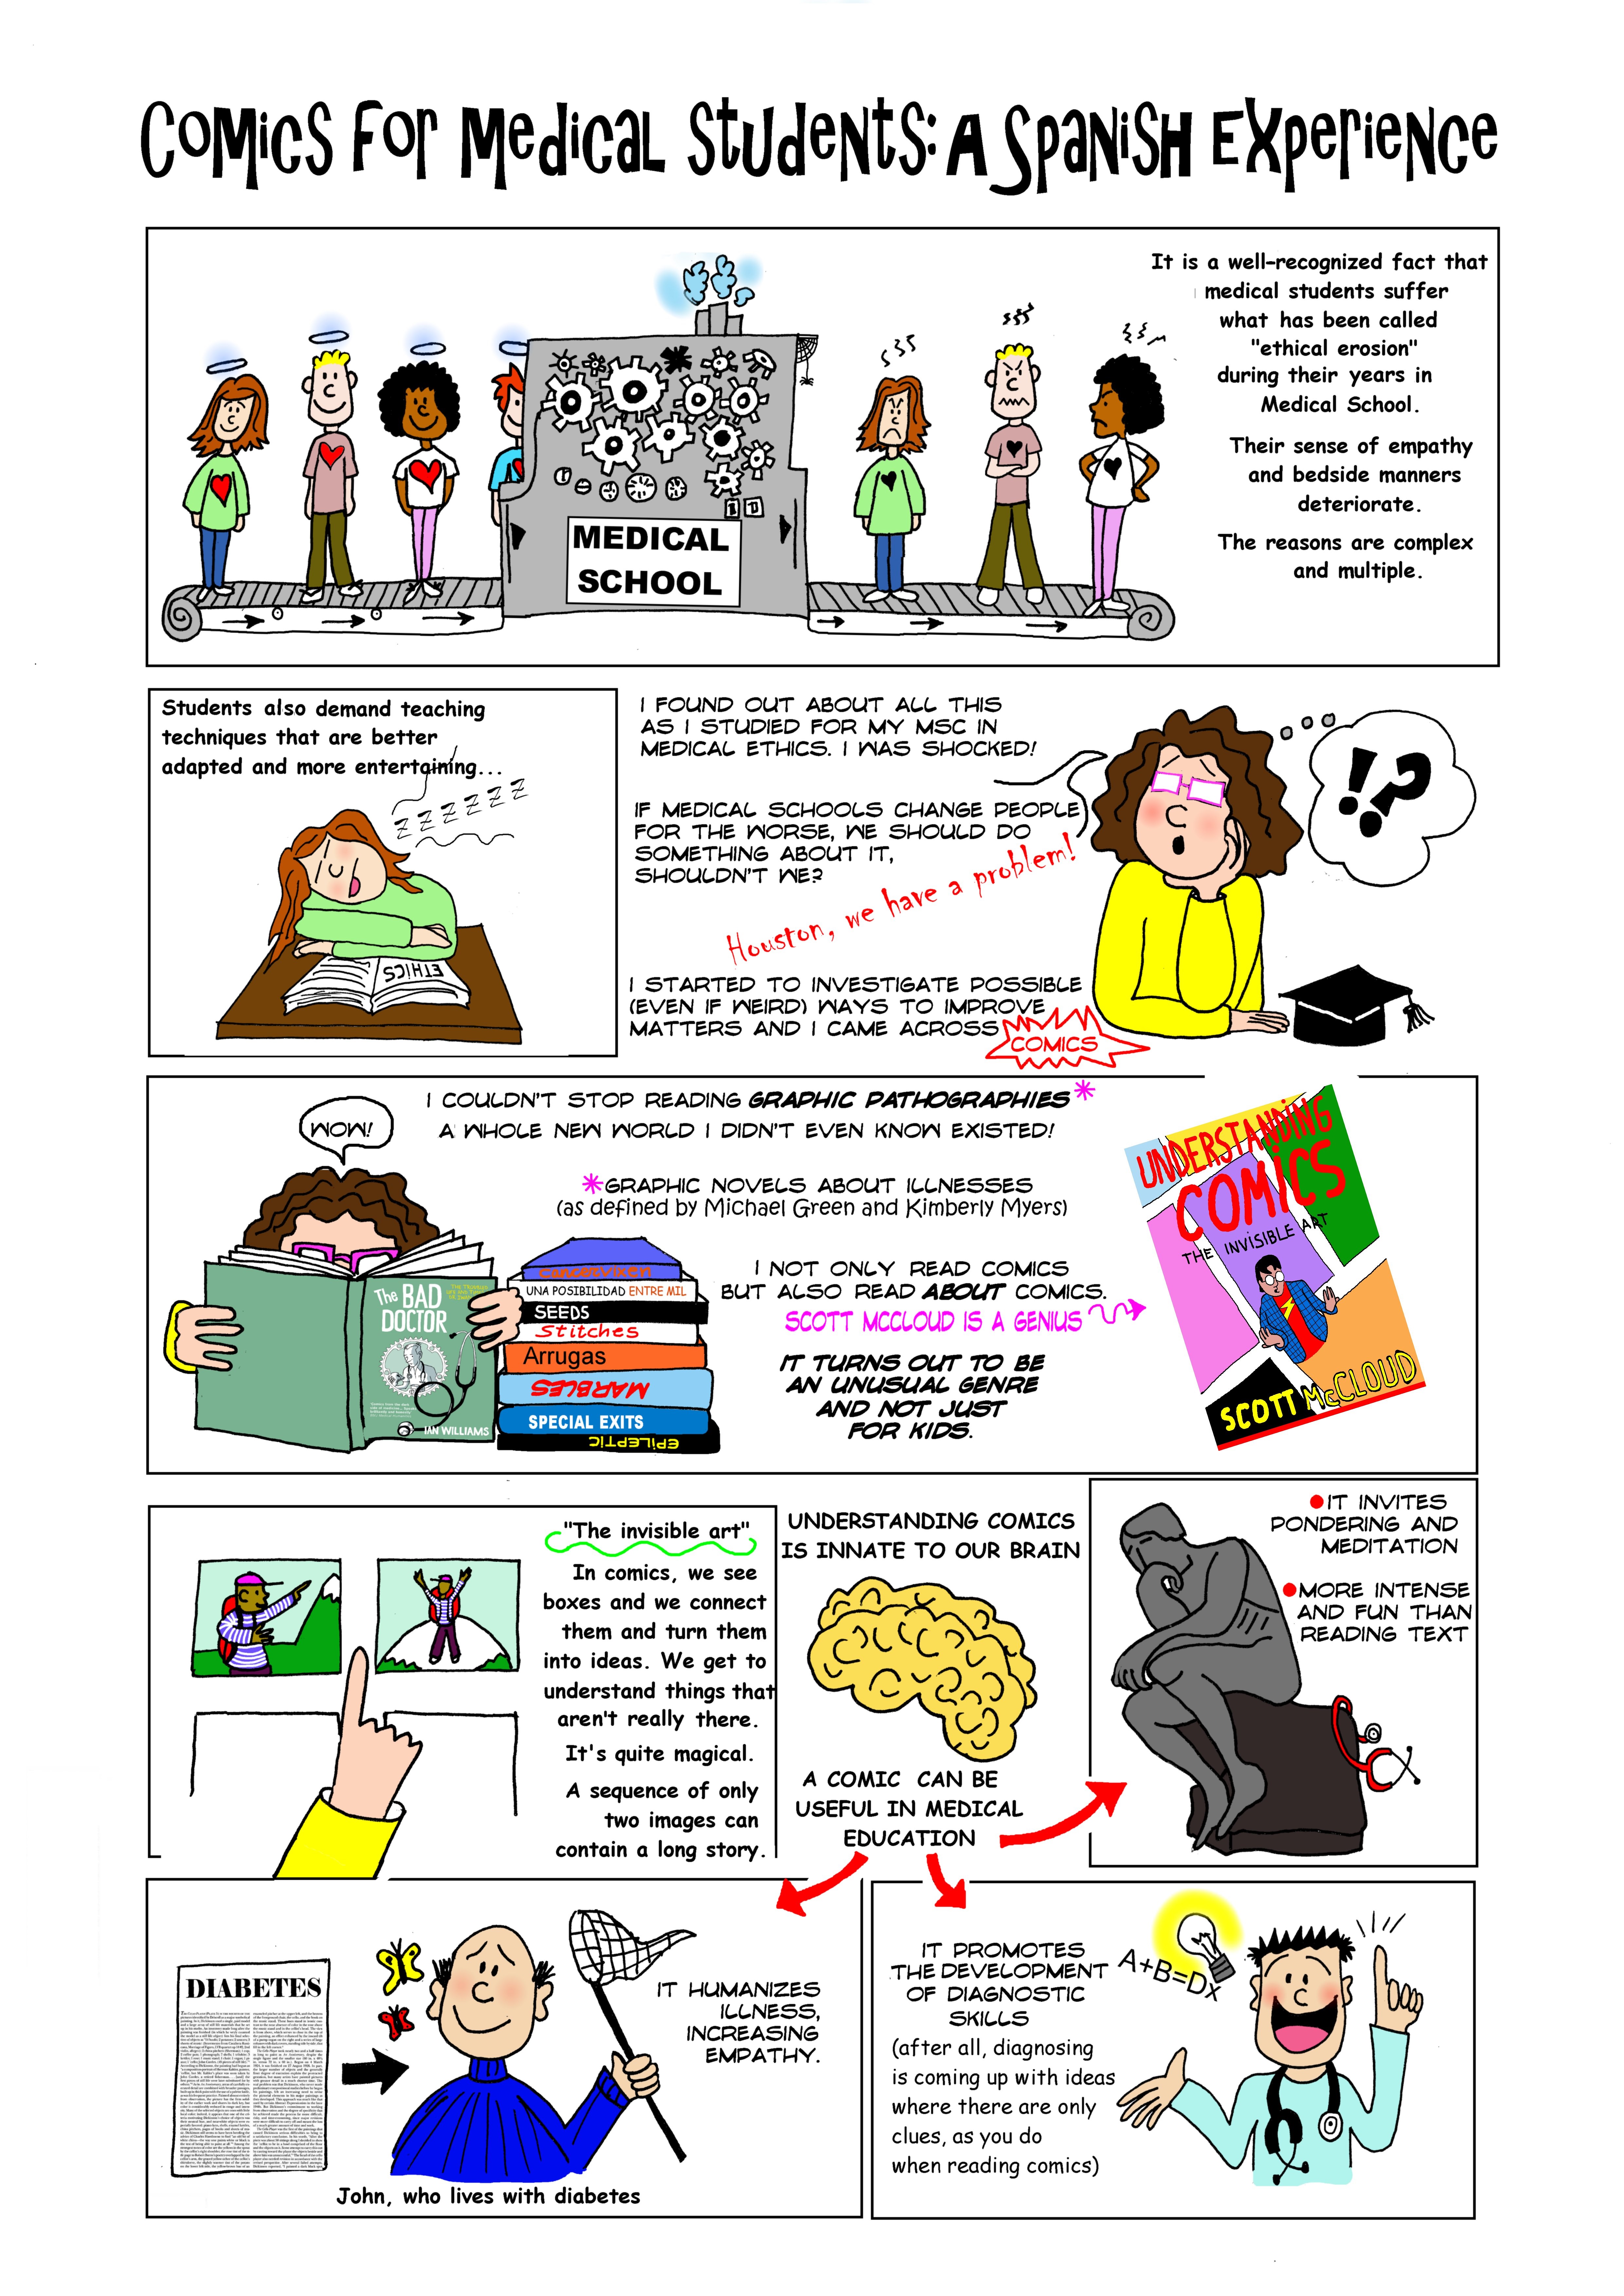 Comics for Medical Students: A Spanish Experience Page 1